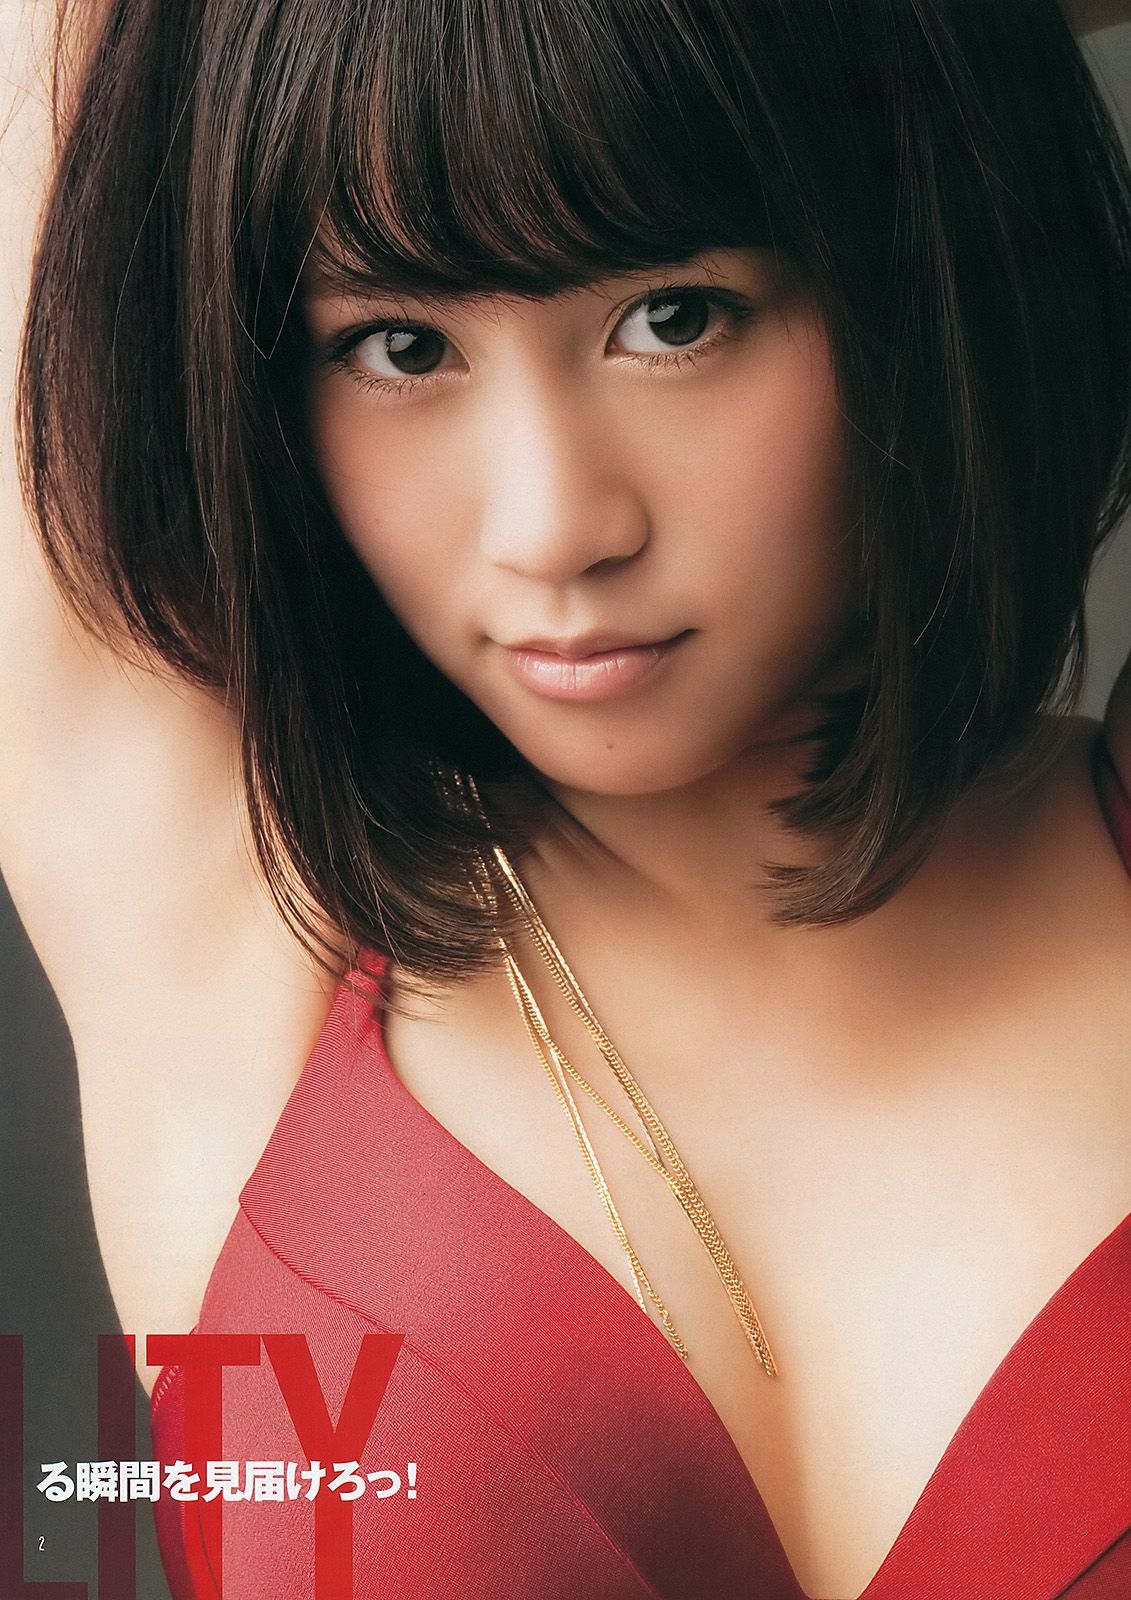 AKB48《DOUBLE ABILITY》 [Weekly Young Jump] 2012年No.26 写真杂志 